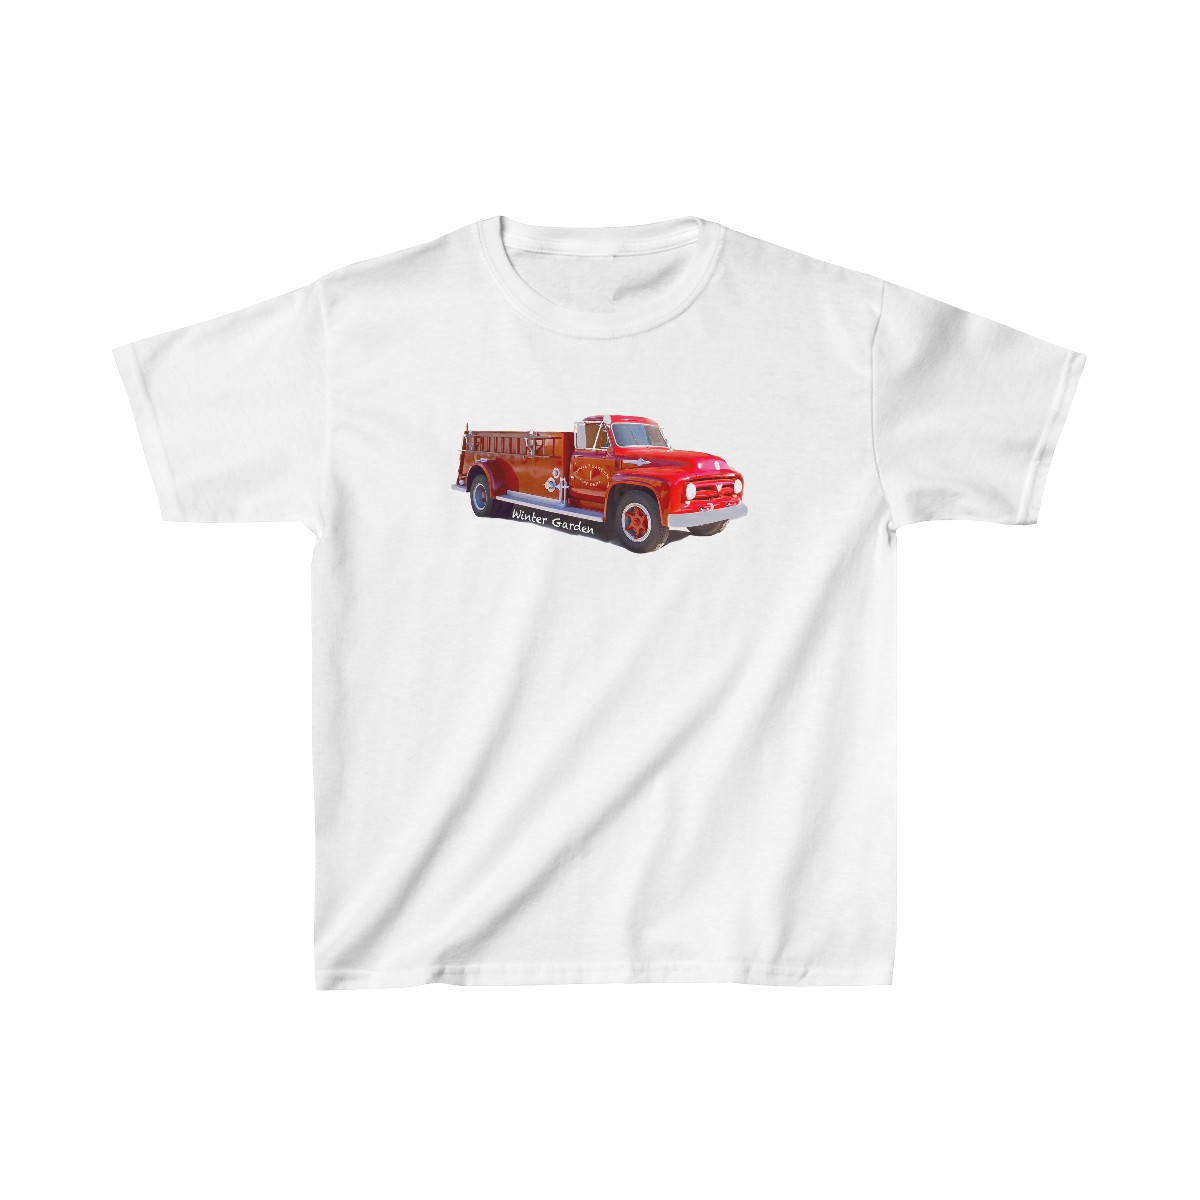 Kids Cotton T-shirt featuring the Heritage Fire Engine product main image